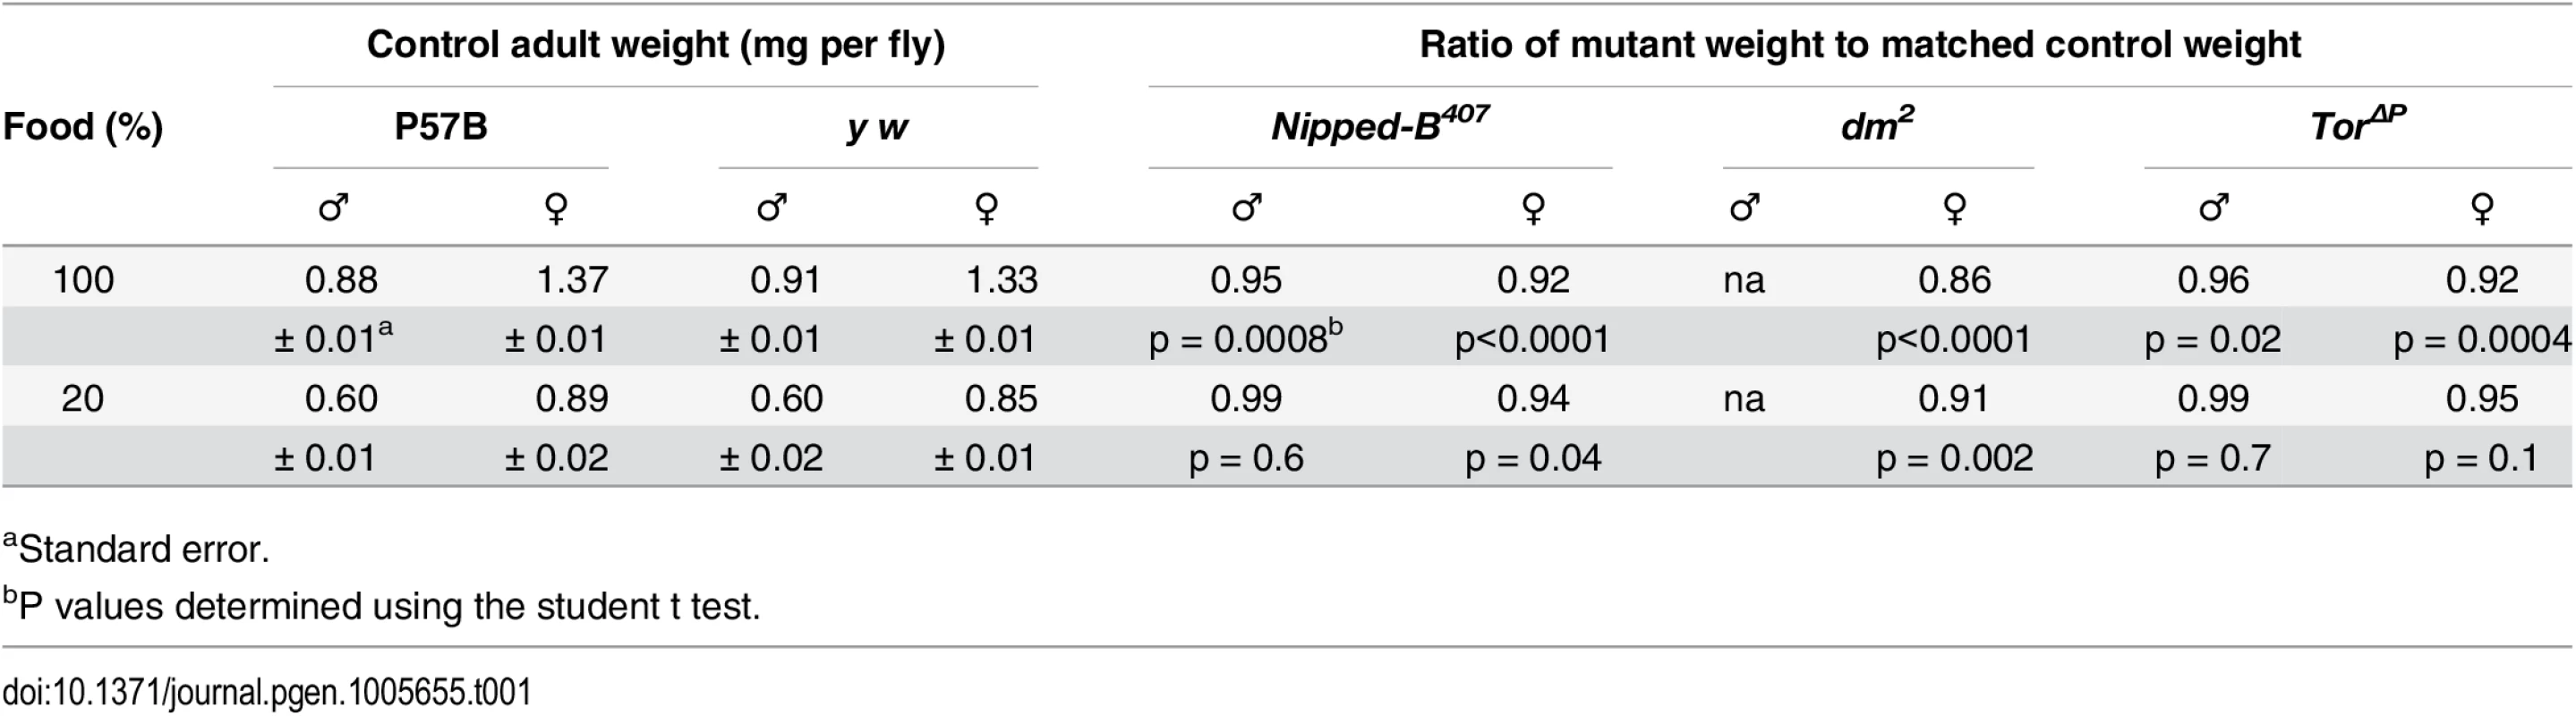 Effects of heterozygous loss-of-function <i>Nipped-B</i>, <i>dm</i>, and <i>Tor</i> mutations on adult body weight.